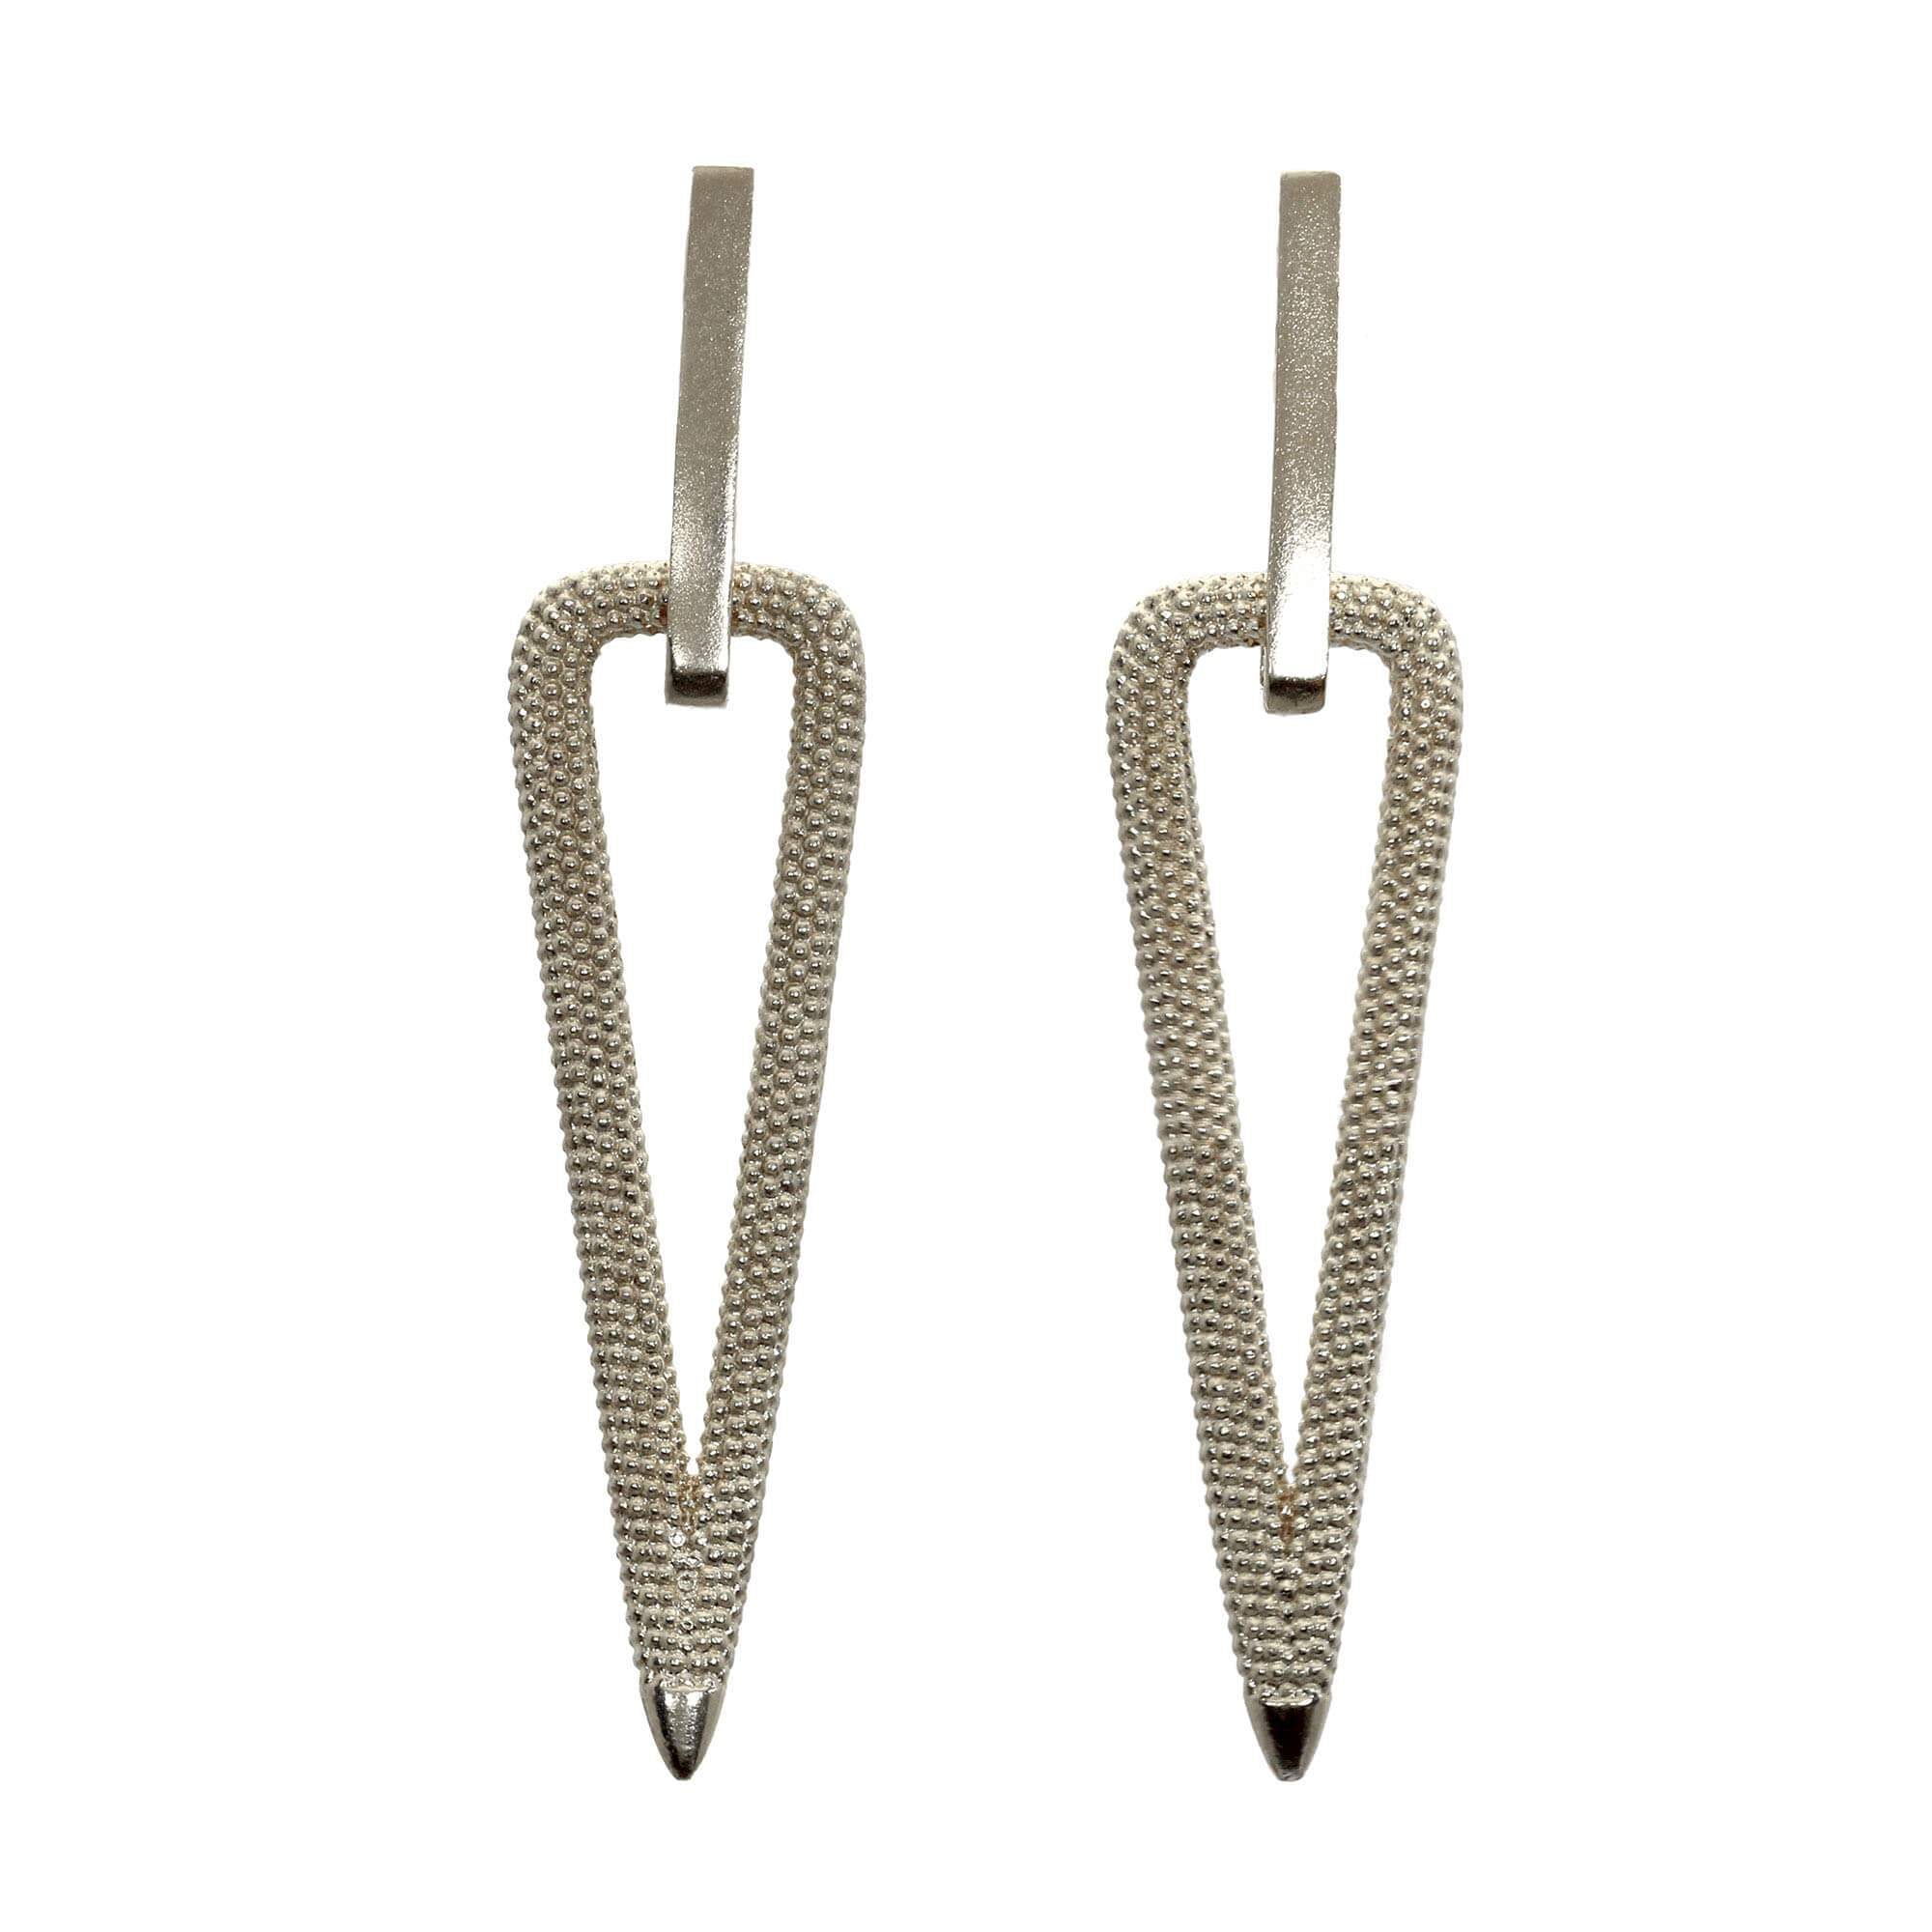 Zinnia Dangle Earrings in sterling silver with textured triangular drop design